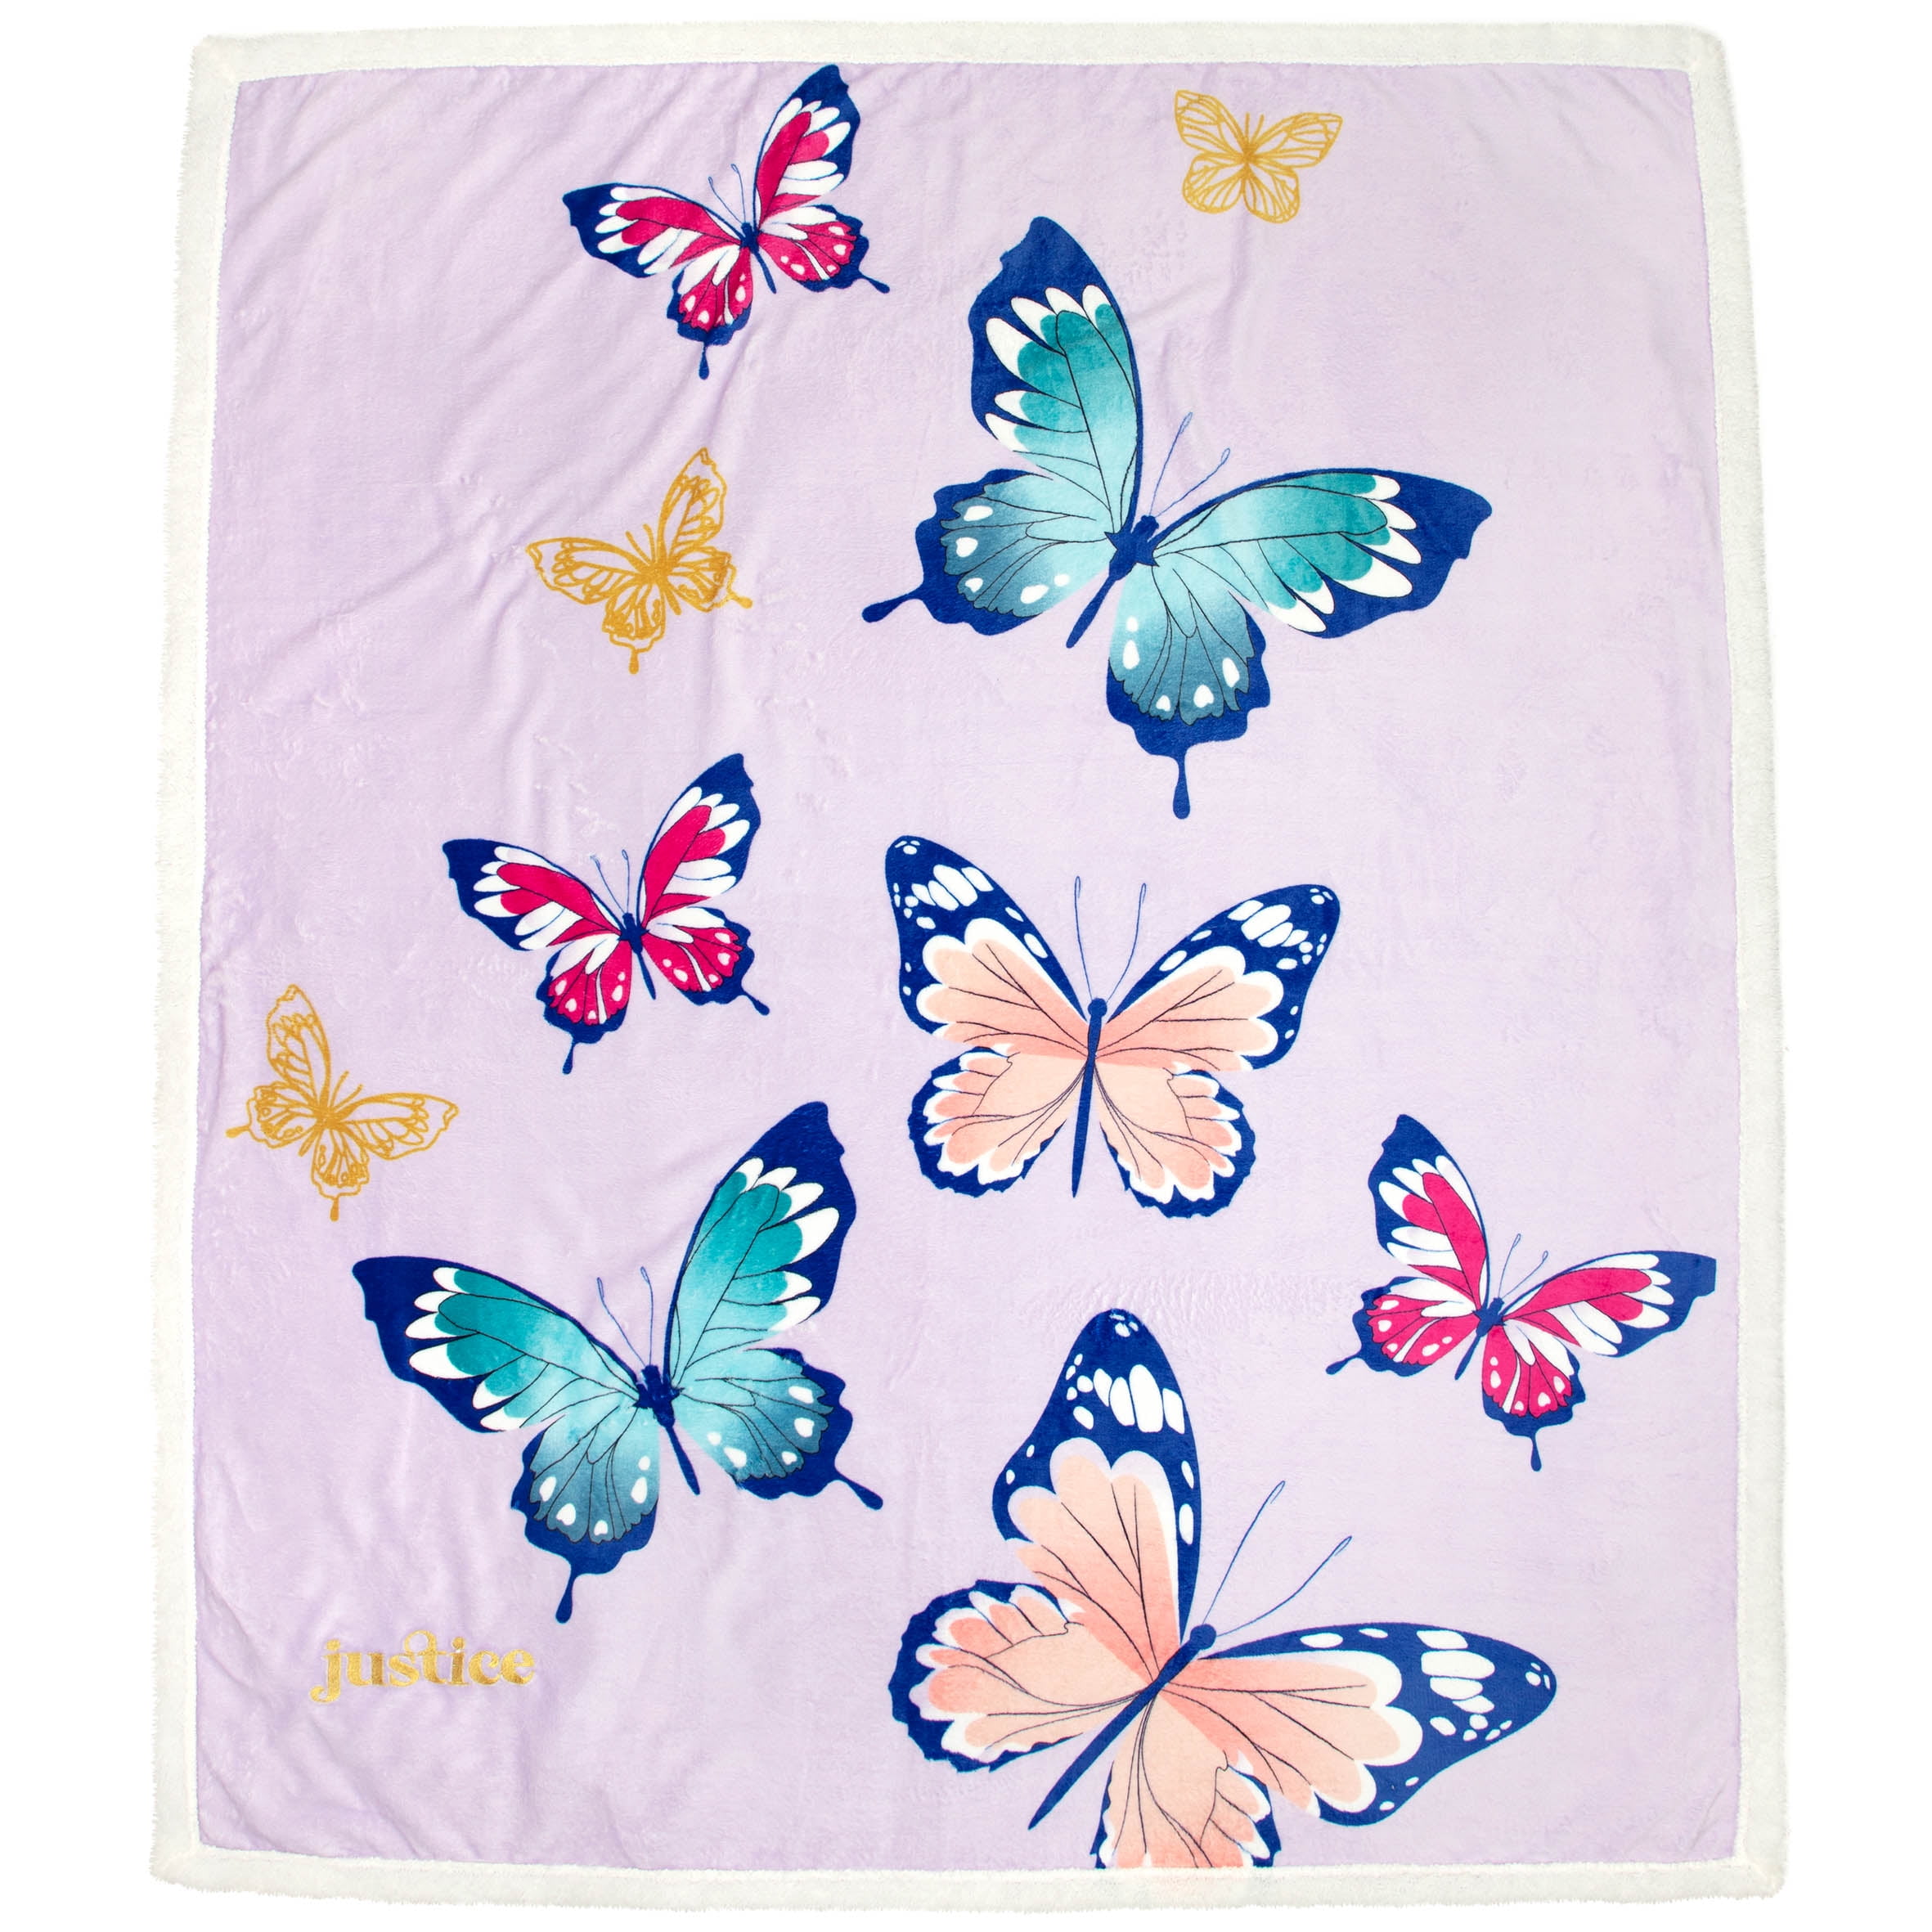 BUTTERFLY SPRING GIRLS FLANNEL BLANKET WITH SHERPA 2 PC TWIN THICK SOFT AND WARM 